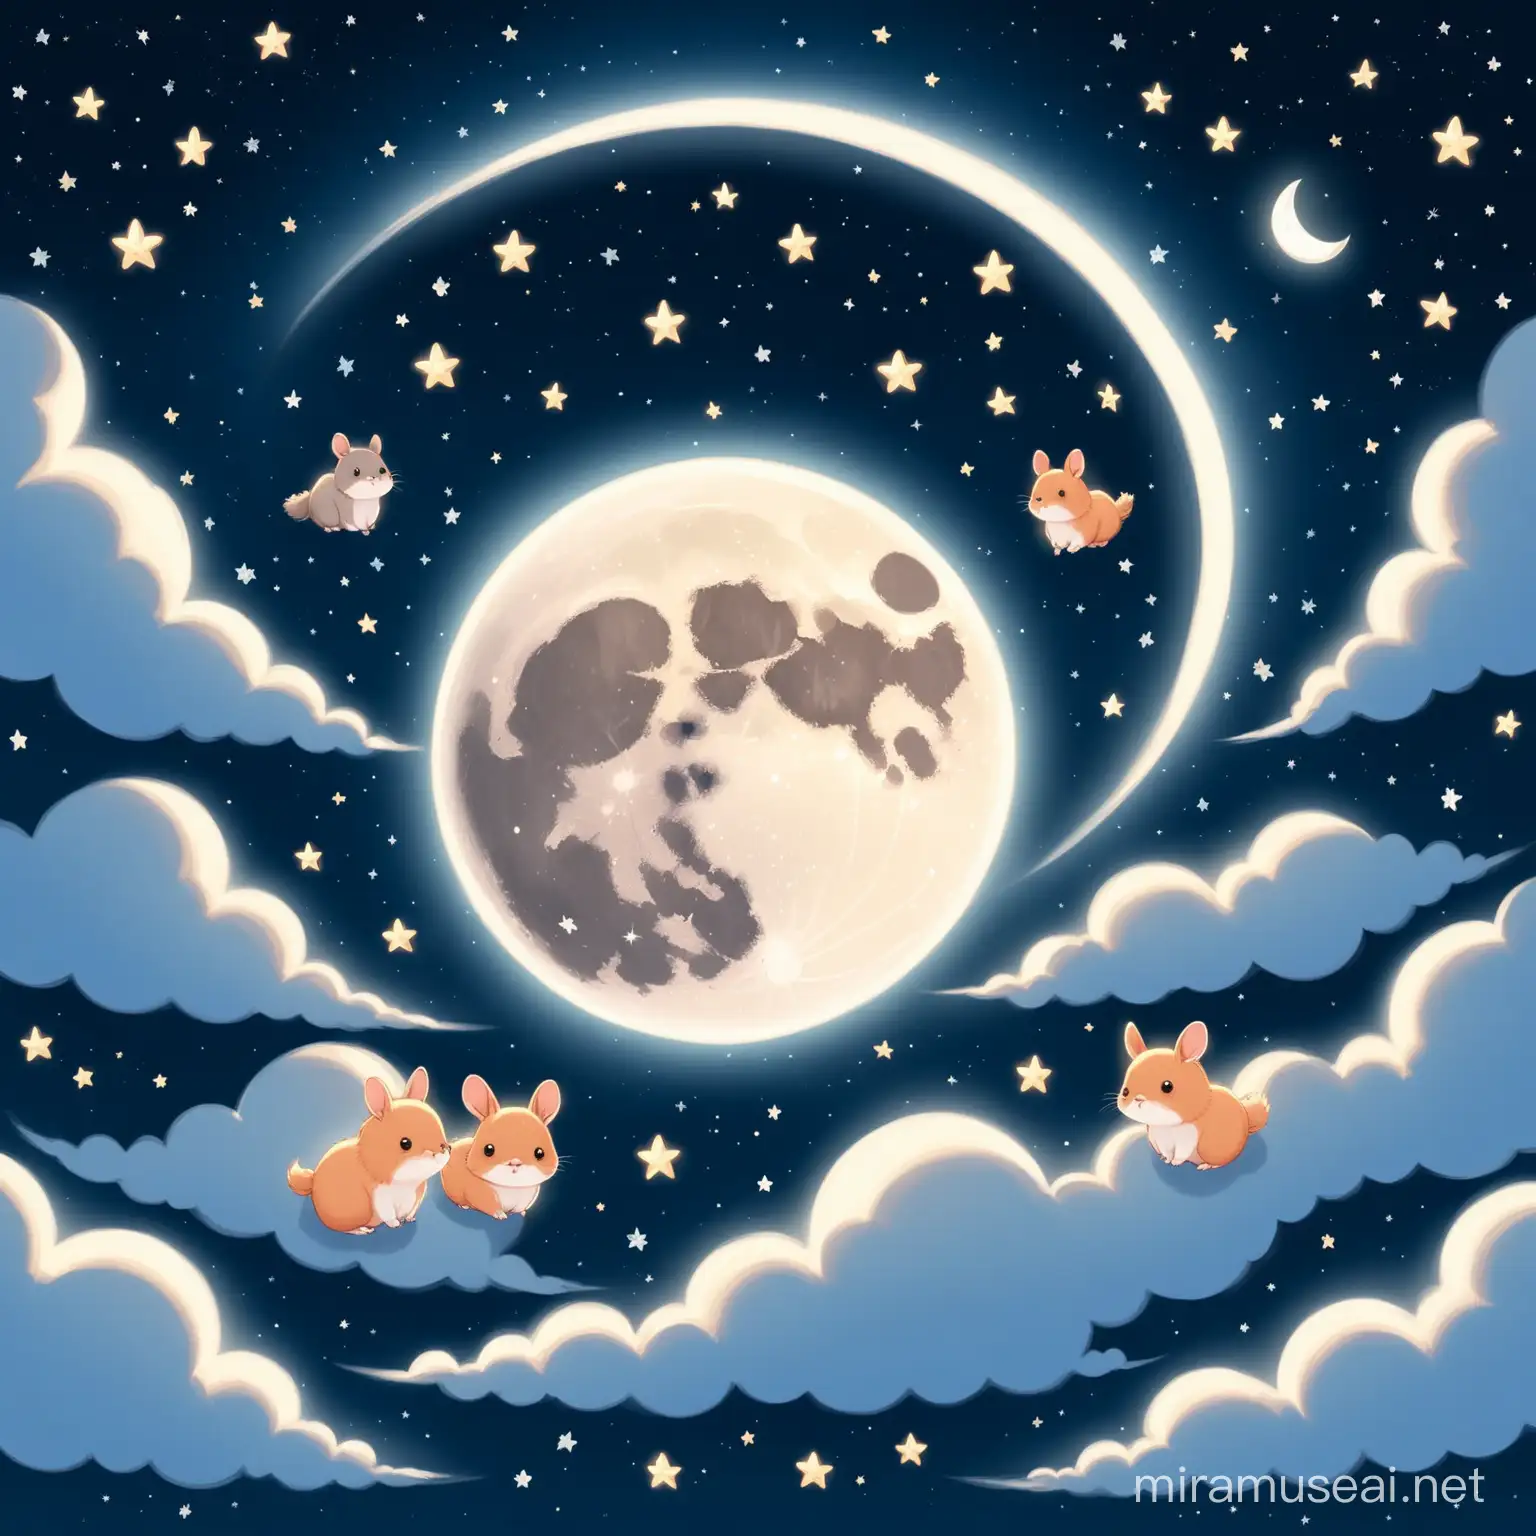 Moonlit Night with Playful Creatures Frolicking in the Clouds